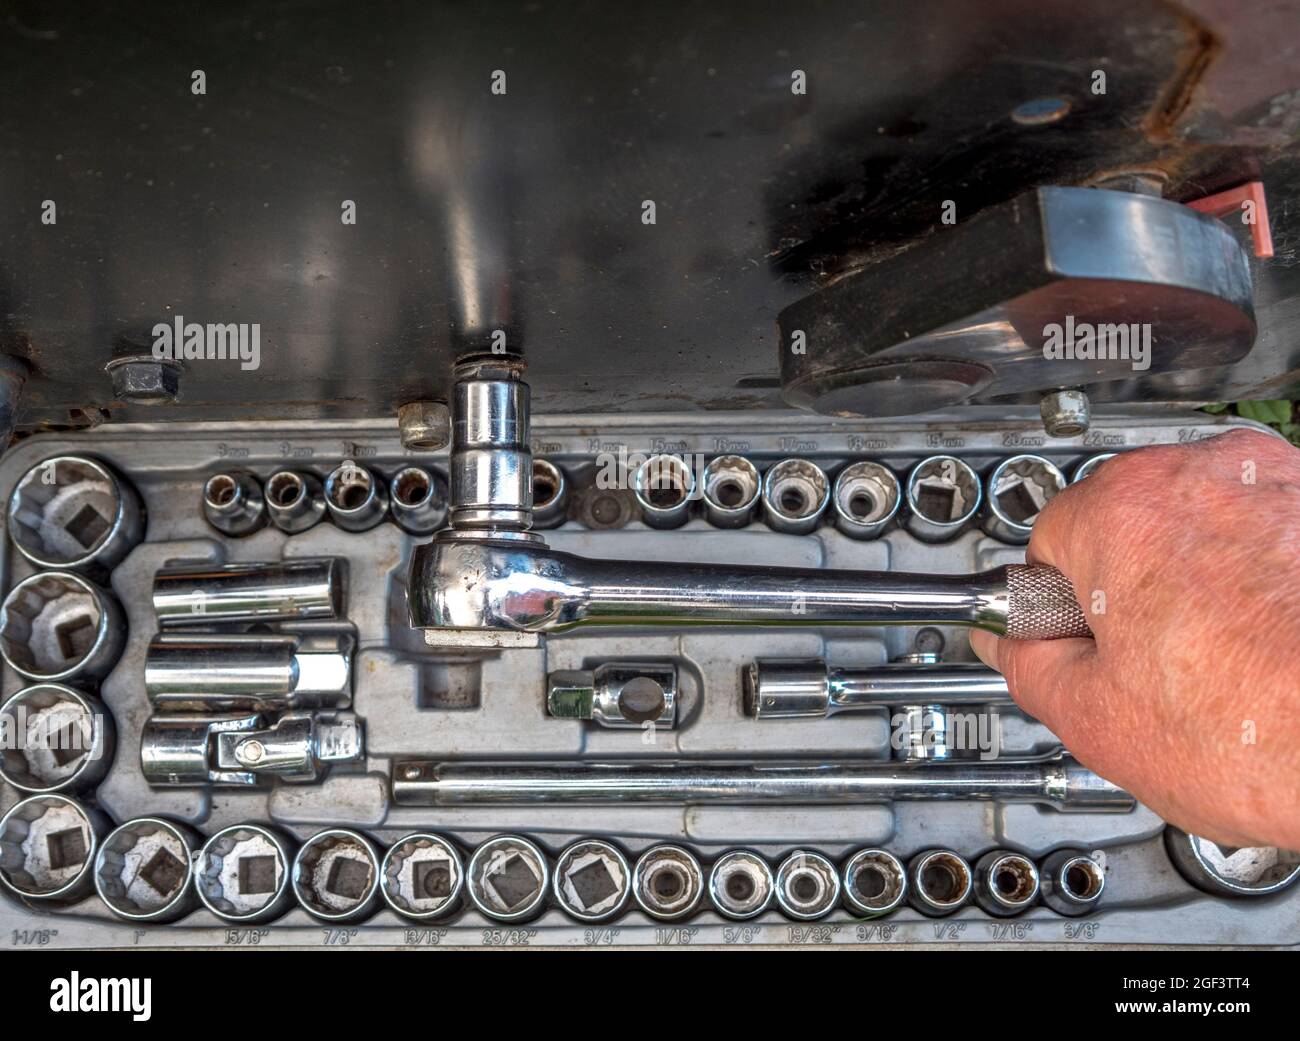 Closeup POV shot of a man’s hands using a chrome steel socket from the set below, attached to a ratchet, to loosen or tighten a machine bolt. Stock Photo